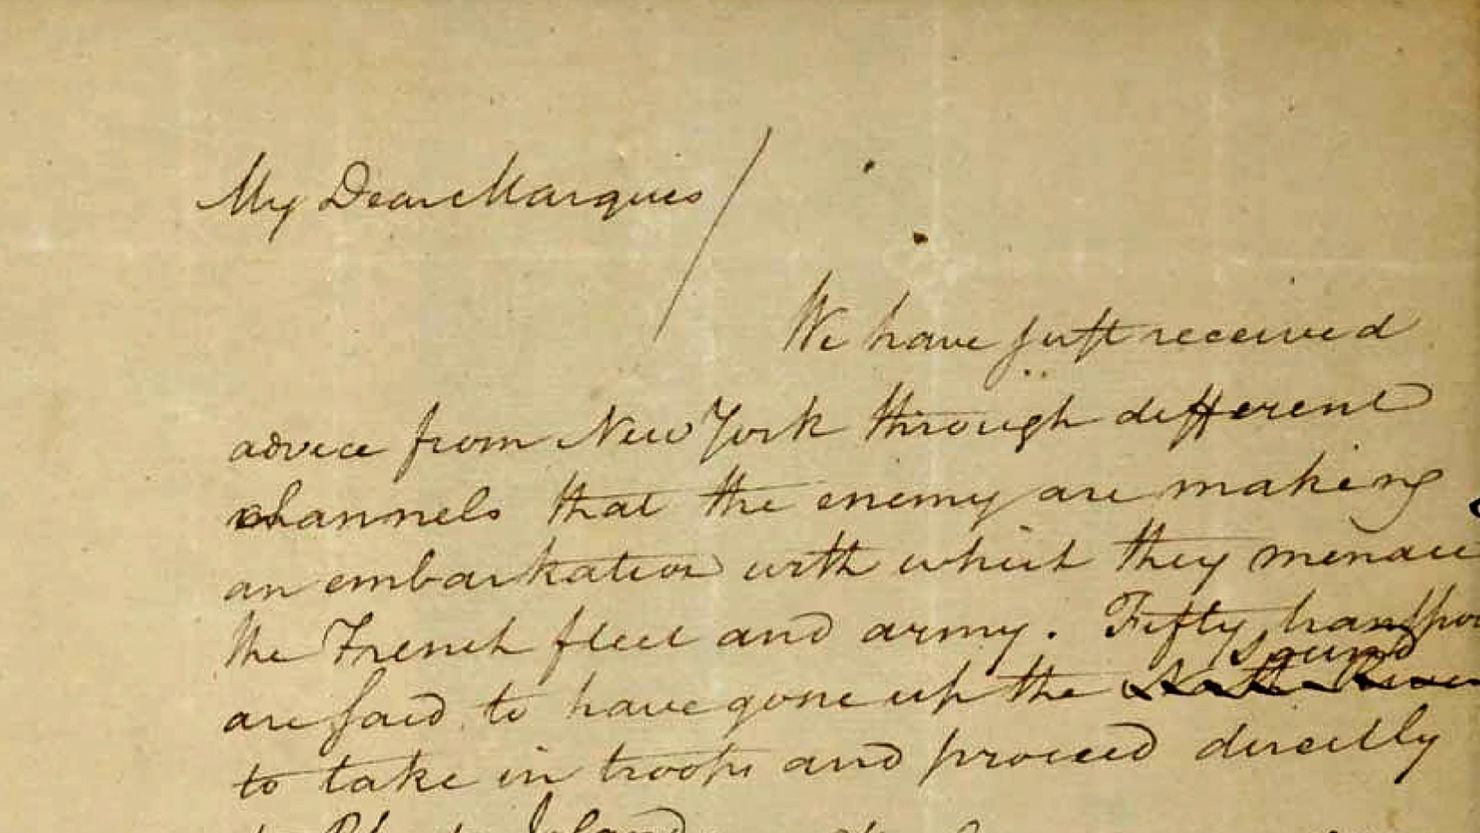 A 1780 letter from Alexander Hamilton to the Marquis de Lafayette was stolen from the Massachusetts Archives decades ago. The complaint asks a judge to order the letter returned to the state. It resurfaced in November 2018 when a Virginia auction house received it from a South Carolina family that wanted to sell it.